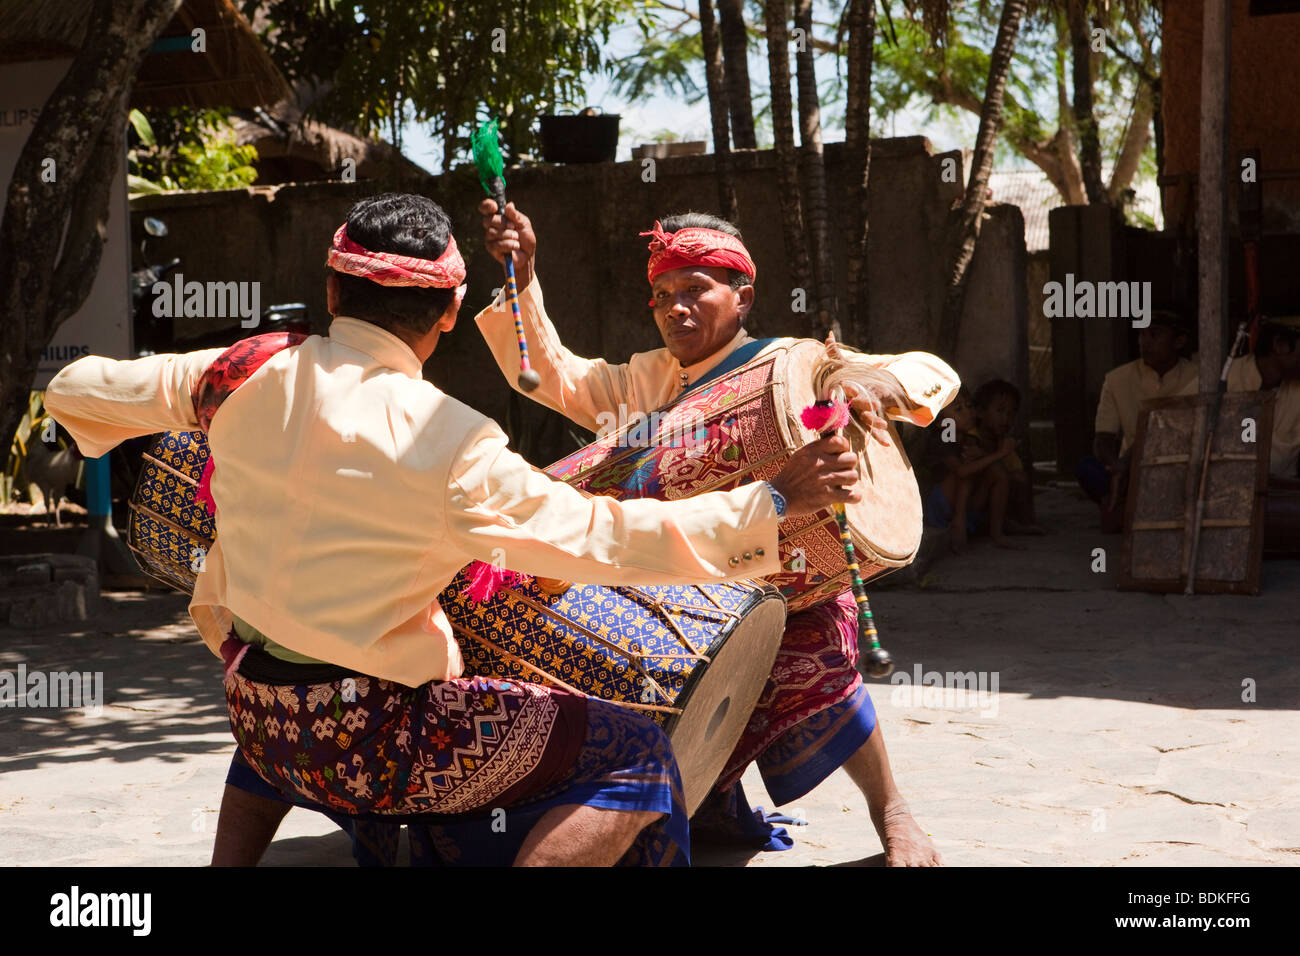 Indonesia, Lombok, Sade, traditional Sasak village, two men drumming to welcome visiting party of tourists Stock Photo